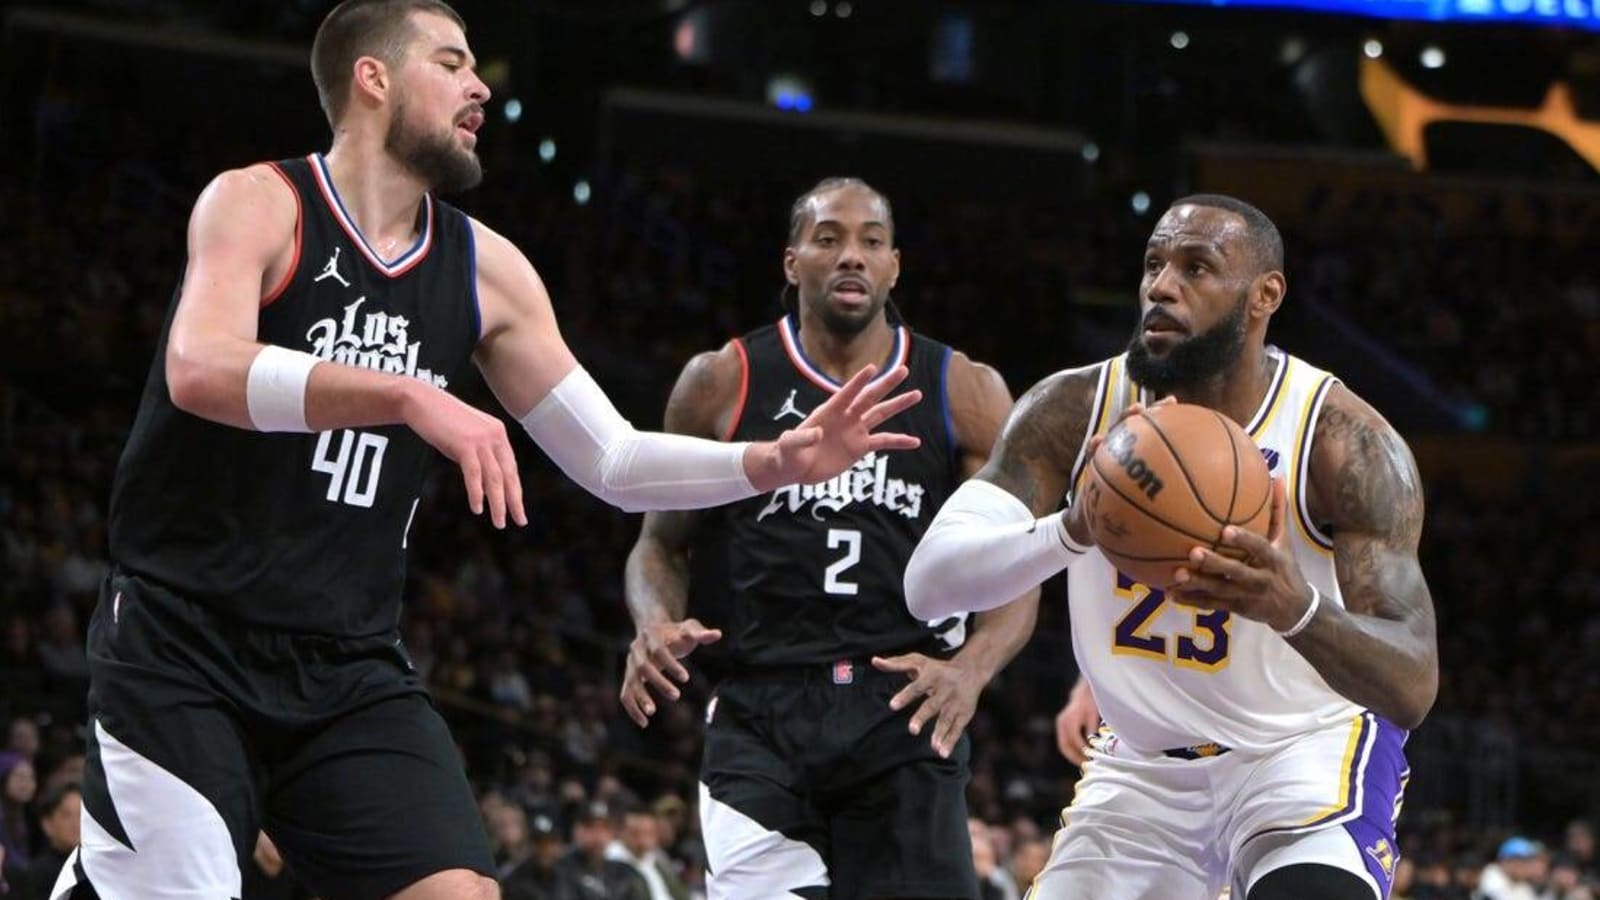 LeBron James (25 points) helps Lakers beat Clippers to end skid